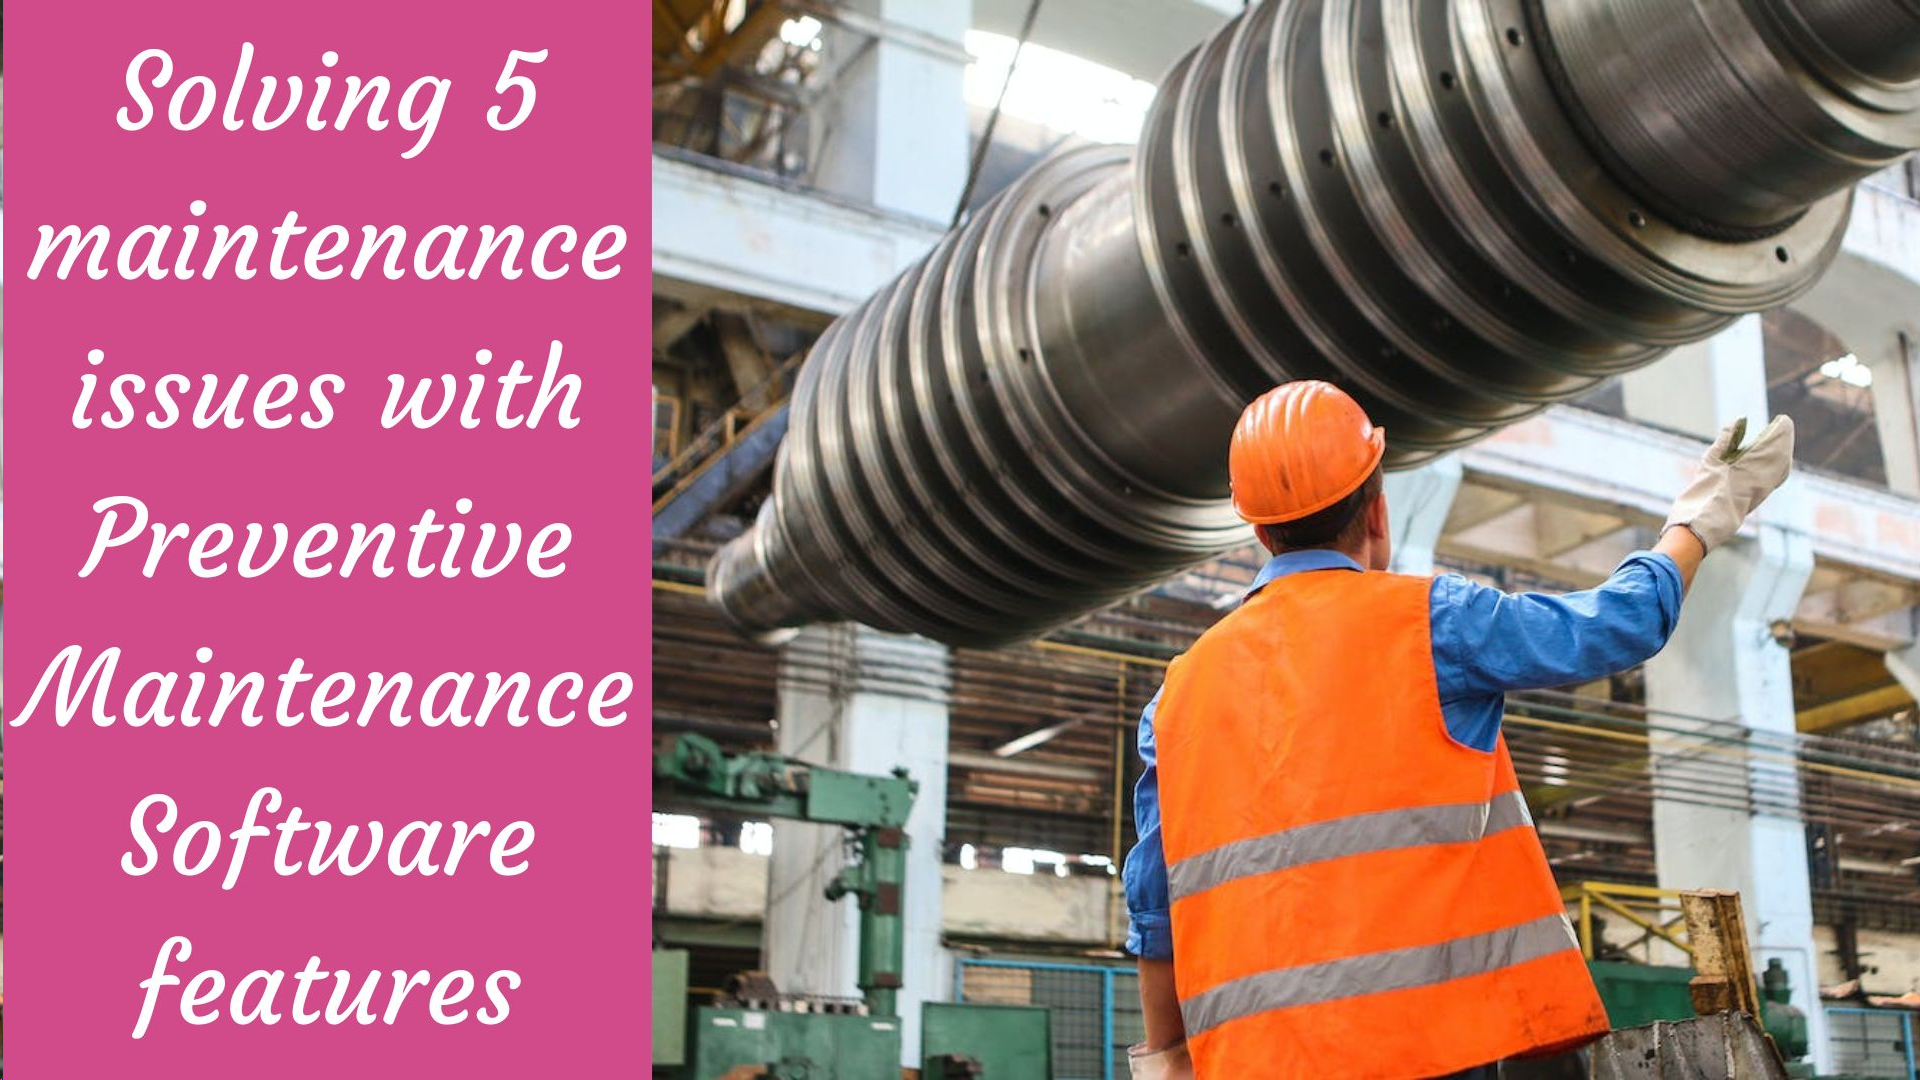 Solving 5 maintenance issues with Preventive Maintenance Software features